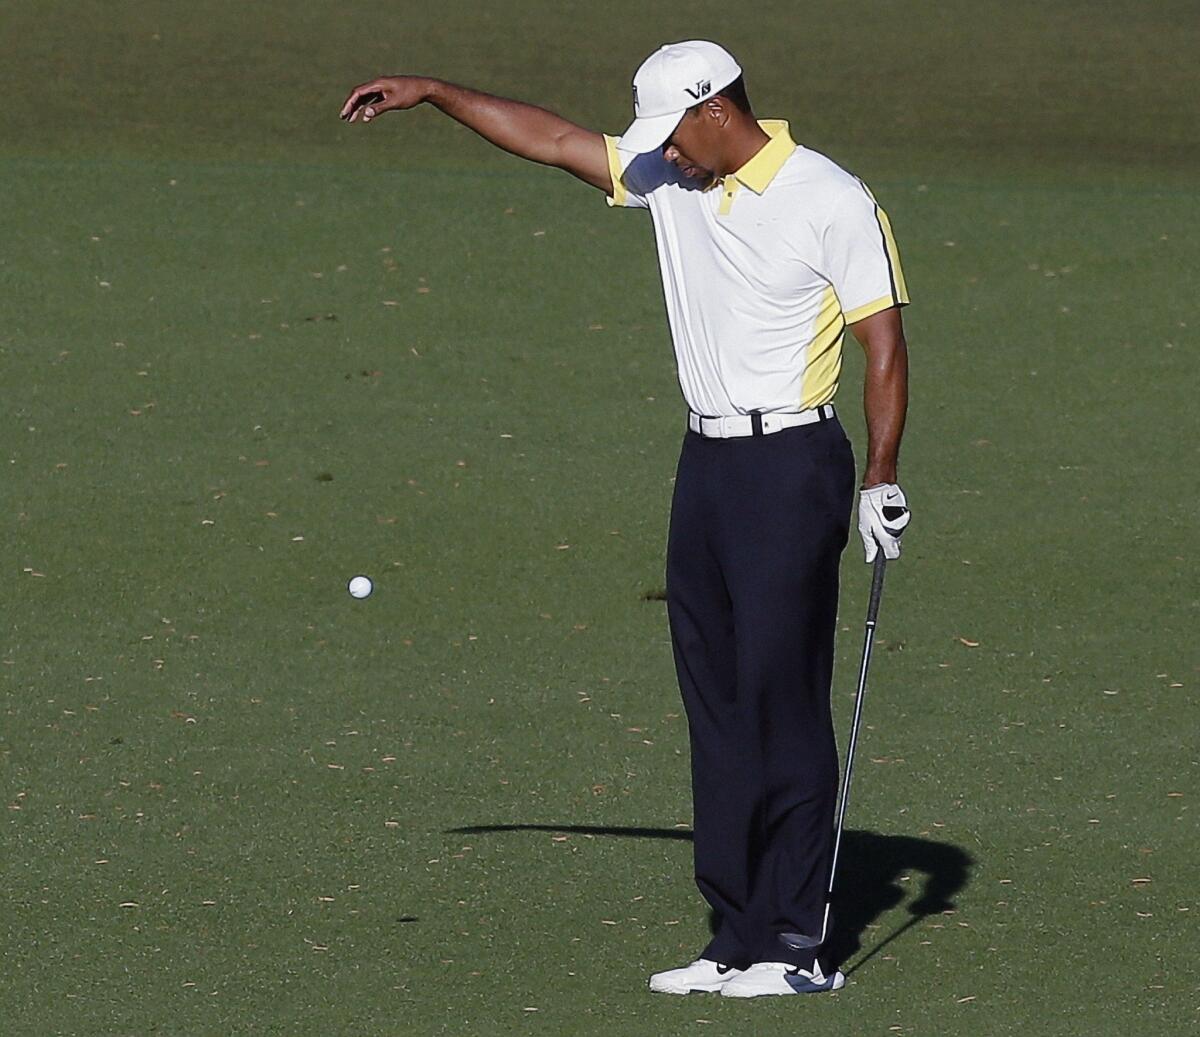 Tiger Woods takes a drop on the 15th hole after his ball went into the water during the second round of the Masters golf tournament in April.